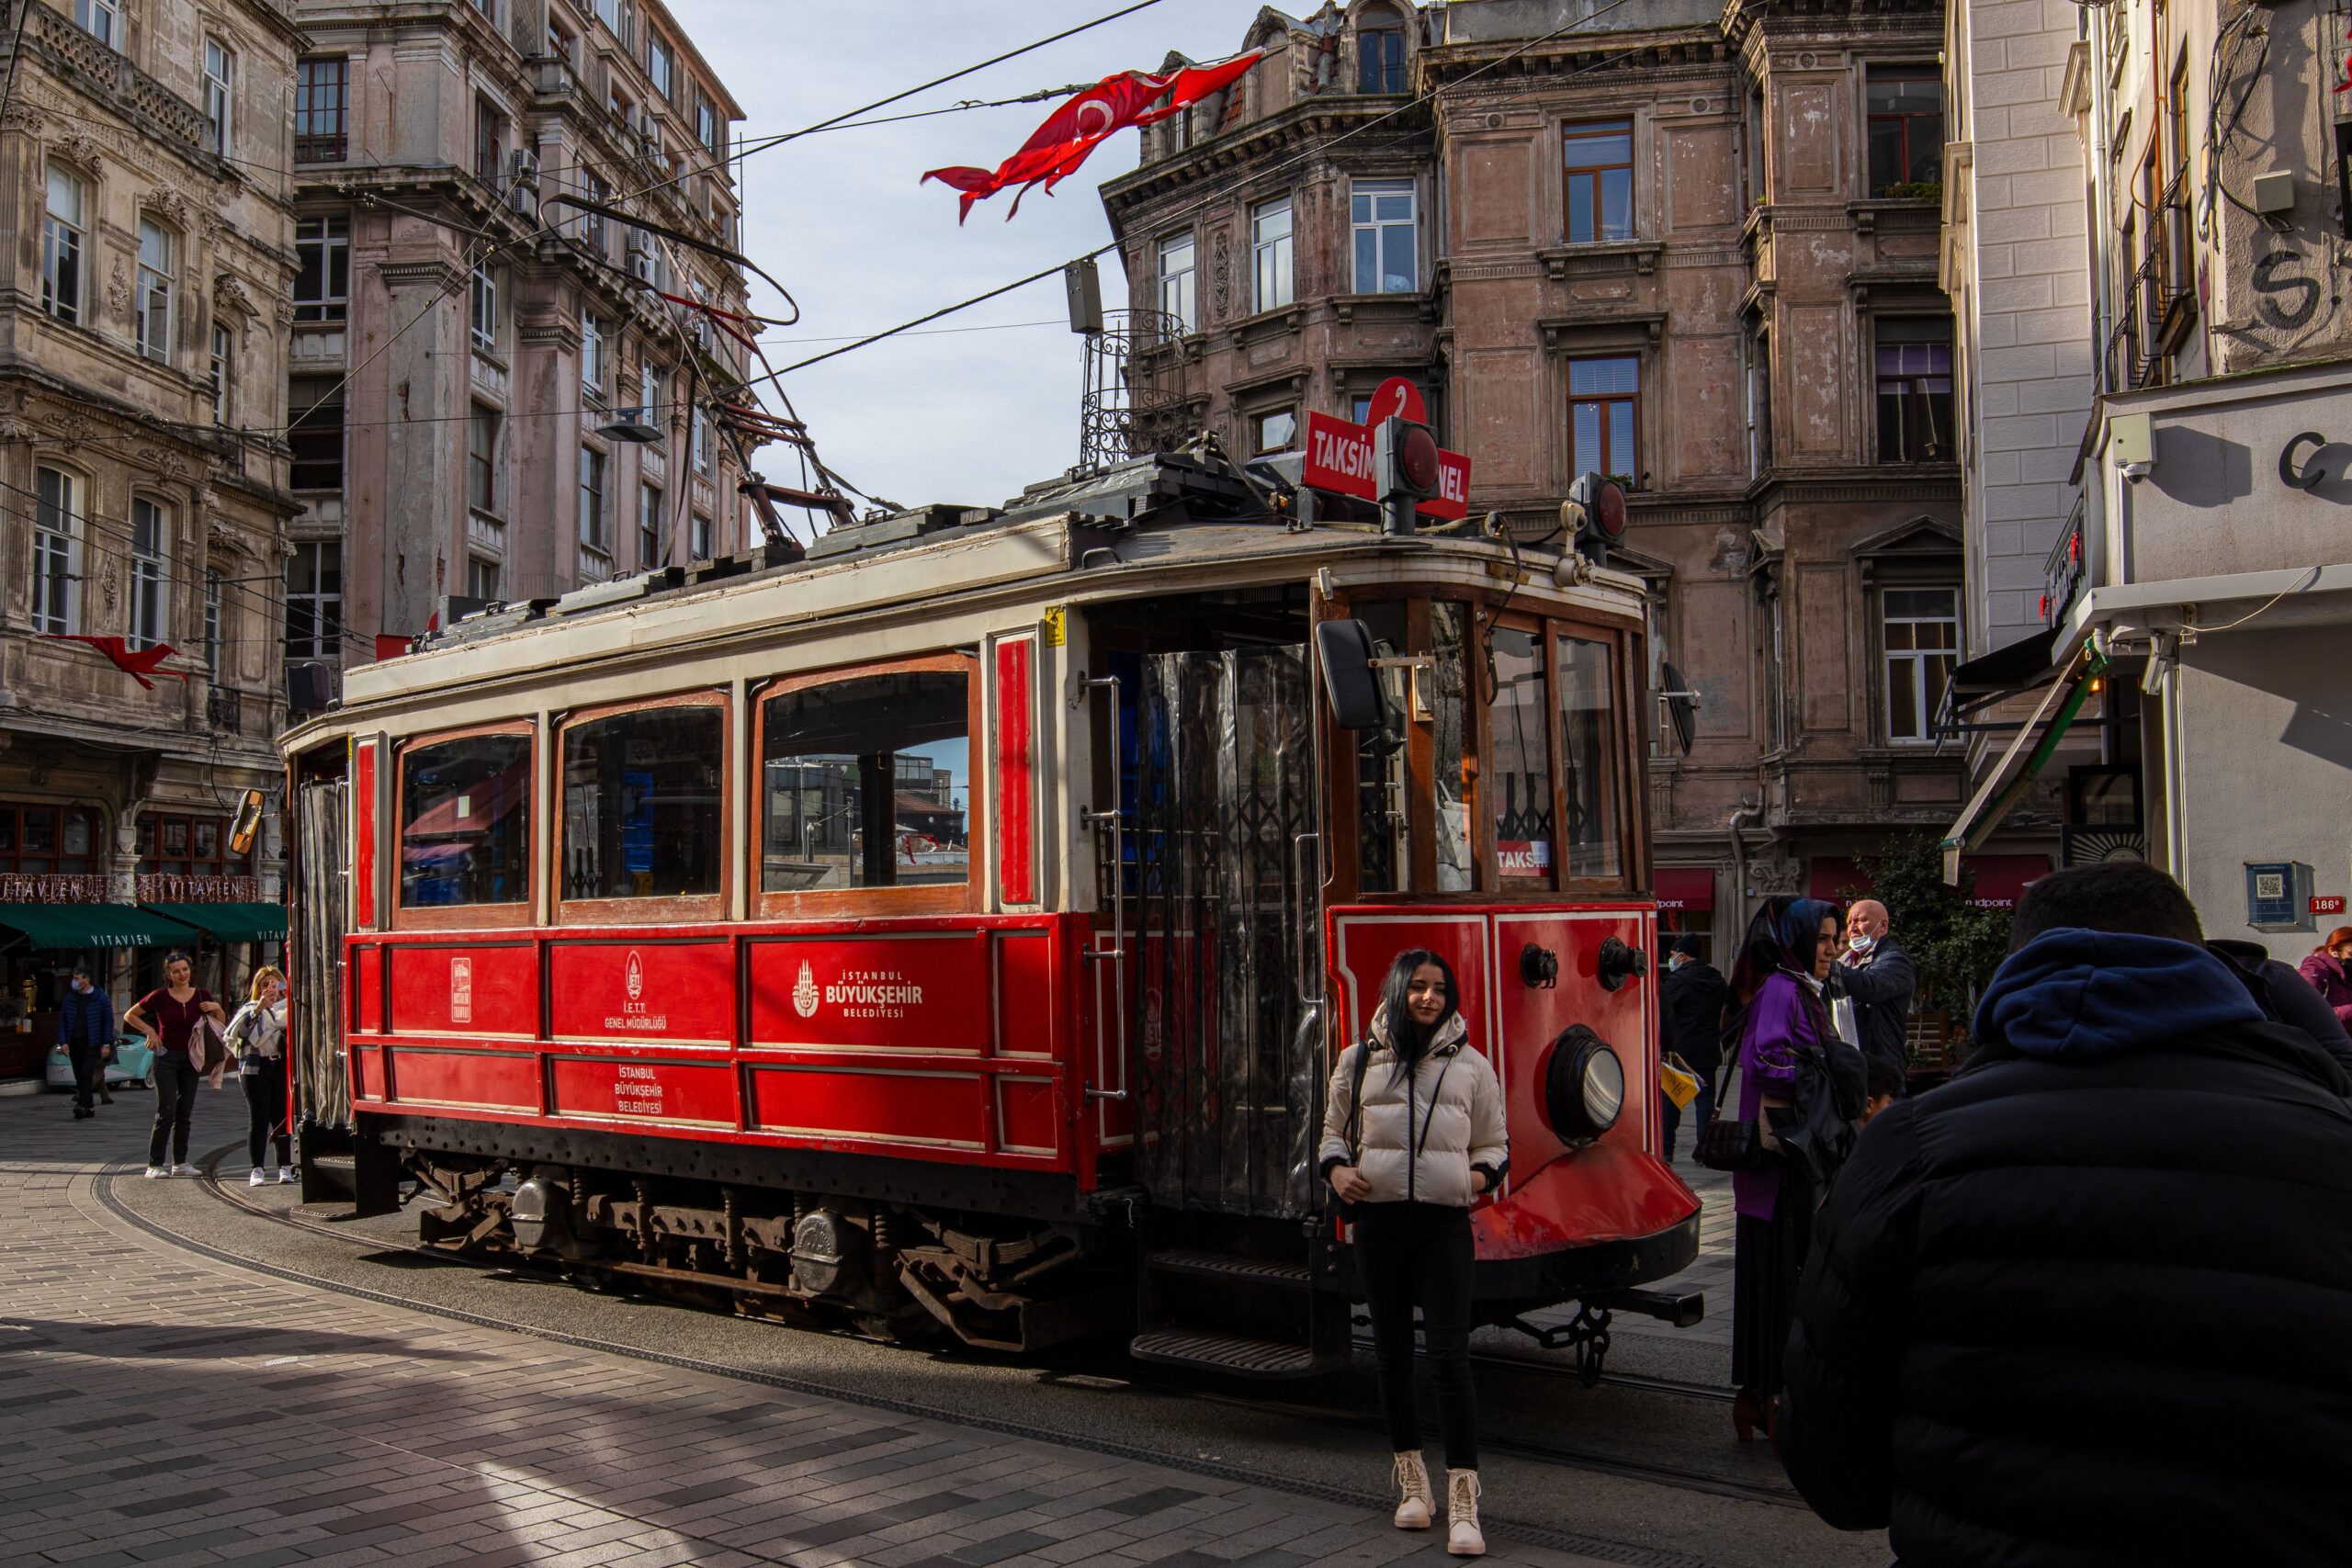 Thumbnail for Why You Should Visit the Istiklal Street? Taksim Square Advice